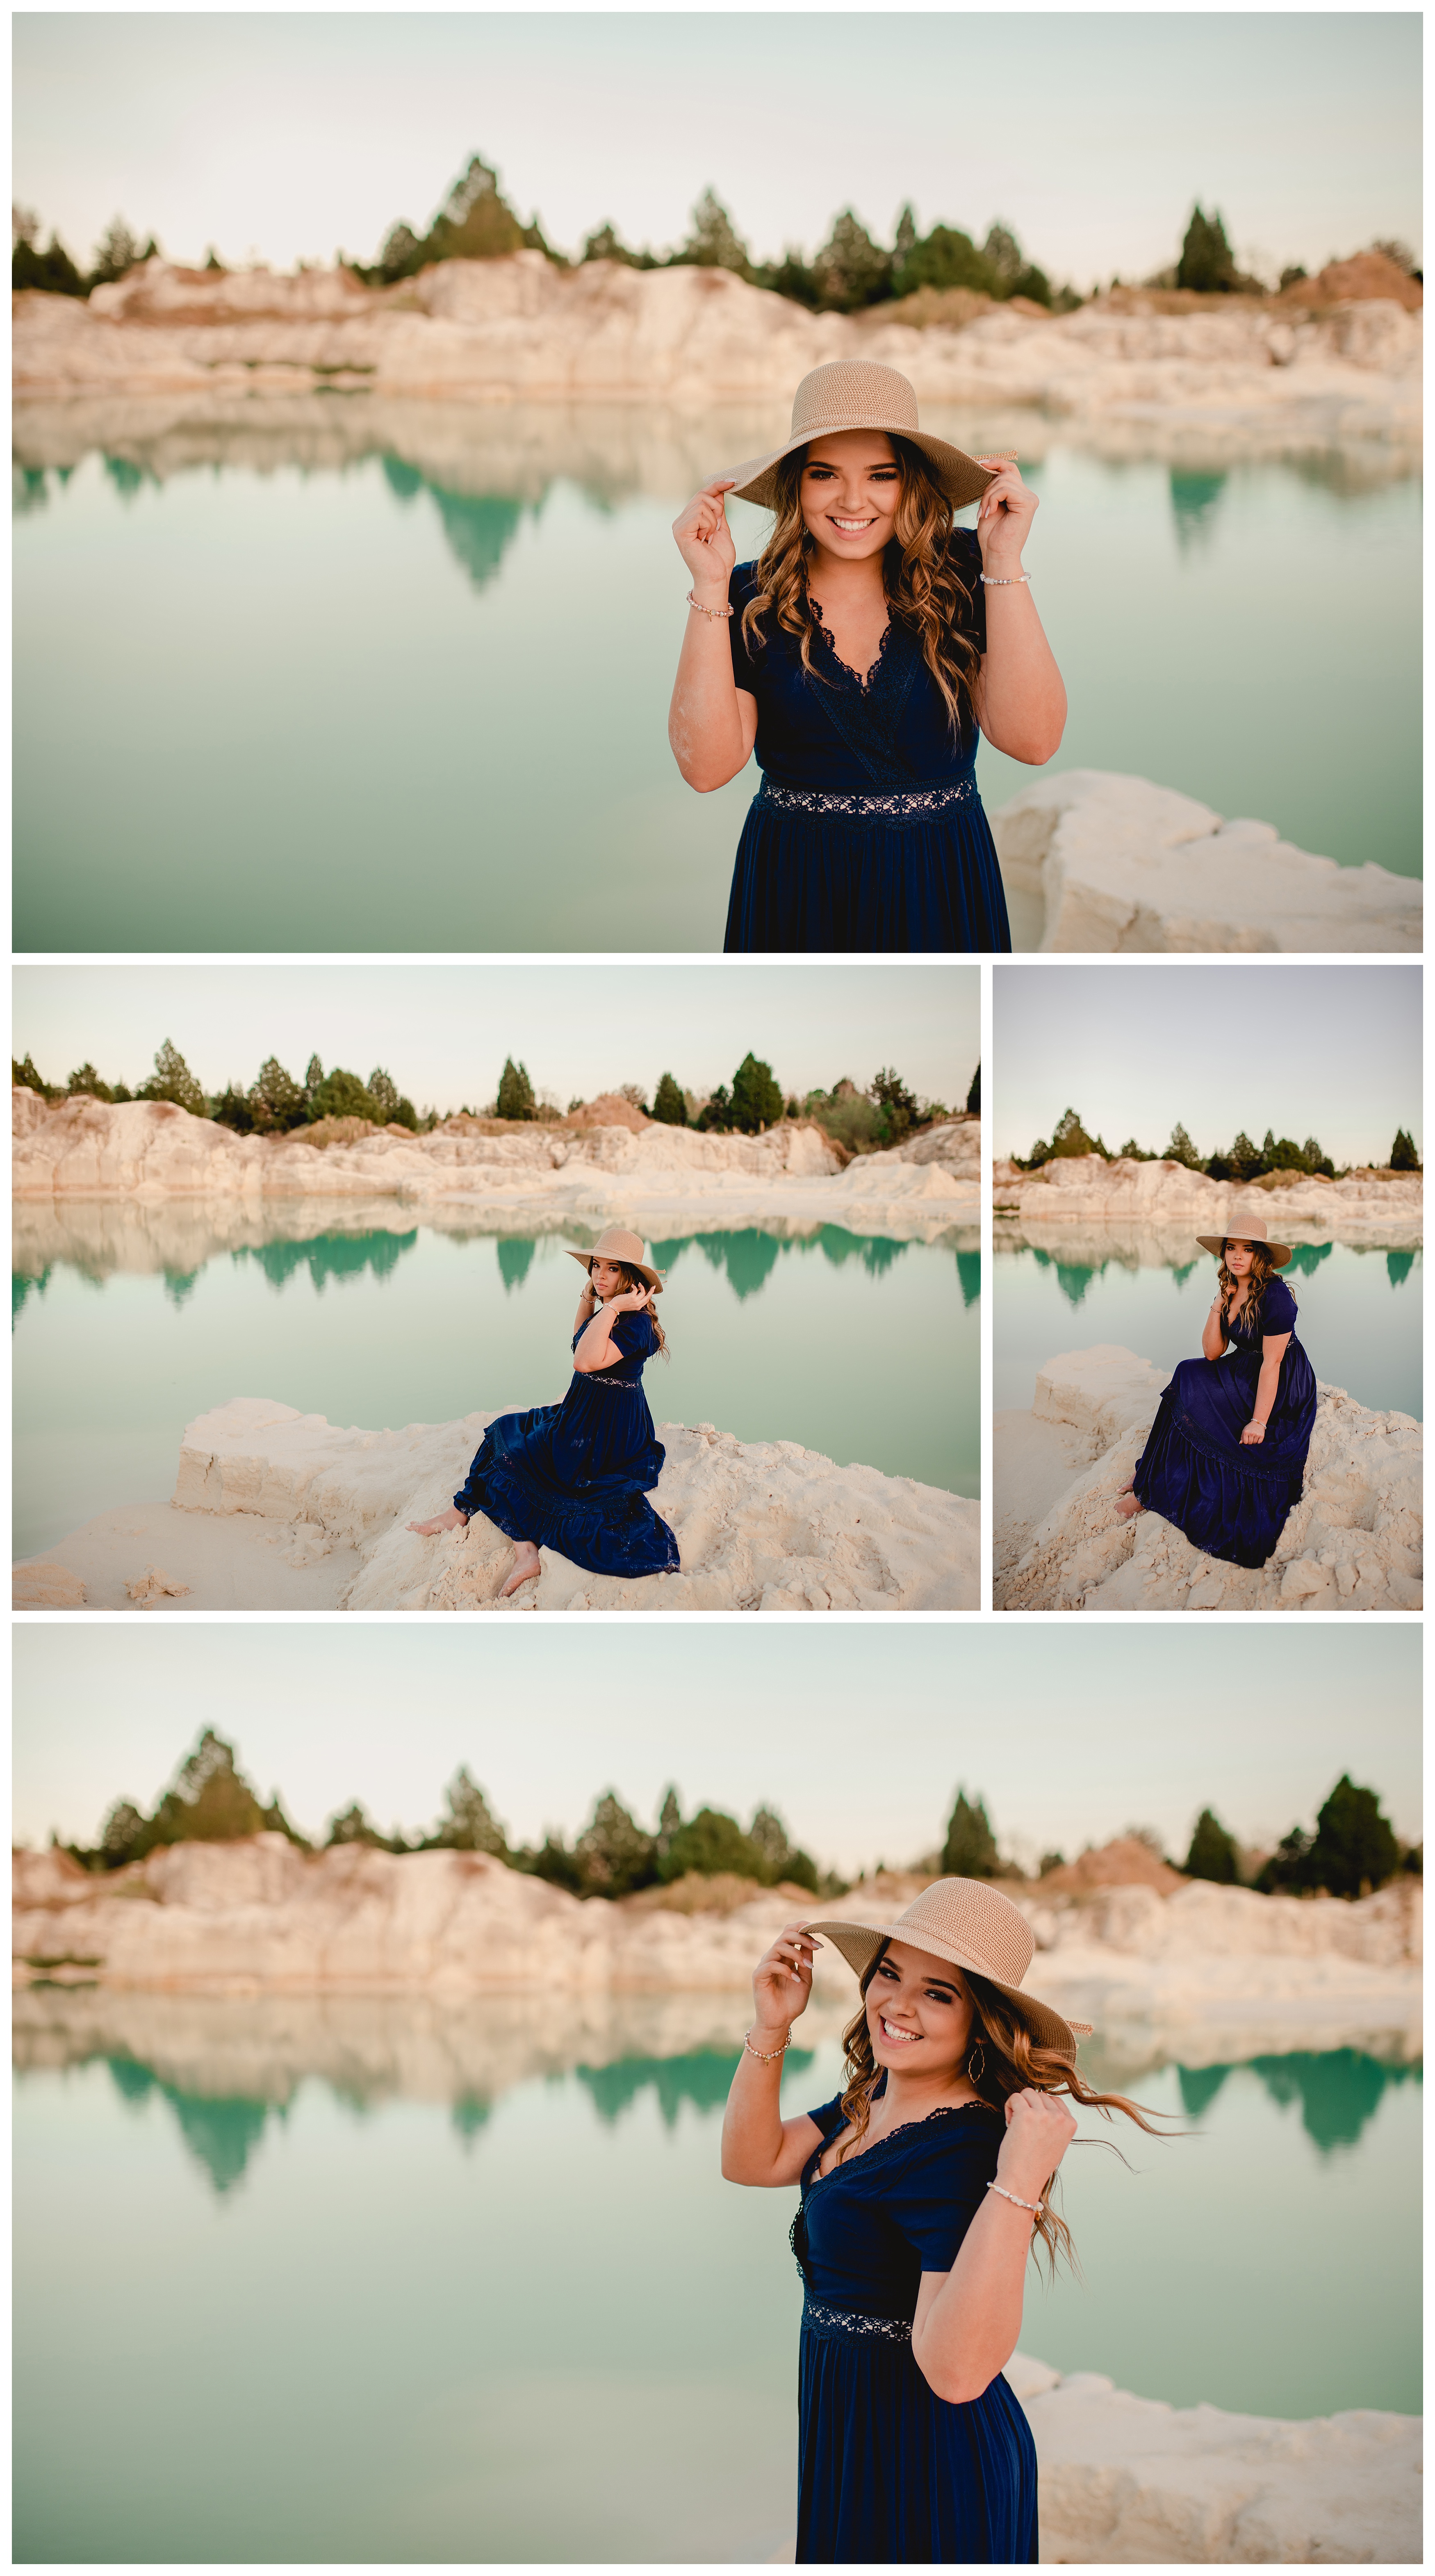 Fun and adventurous high school senior photos in a unique water location. Shelly Williams Photography